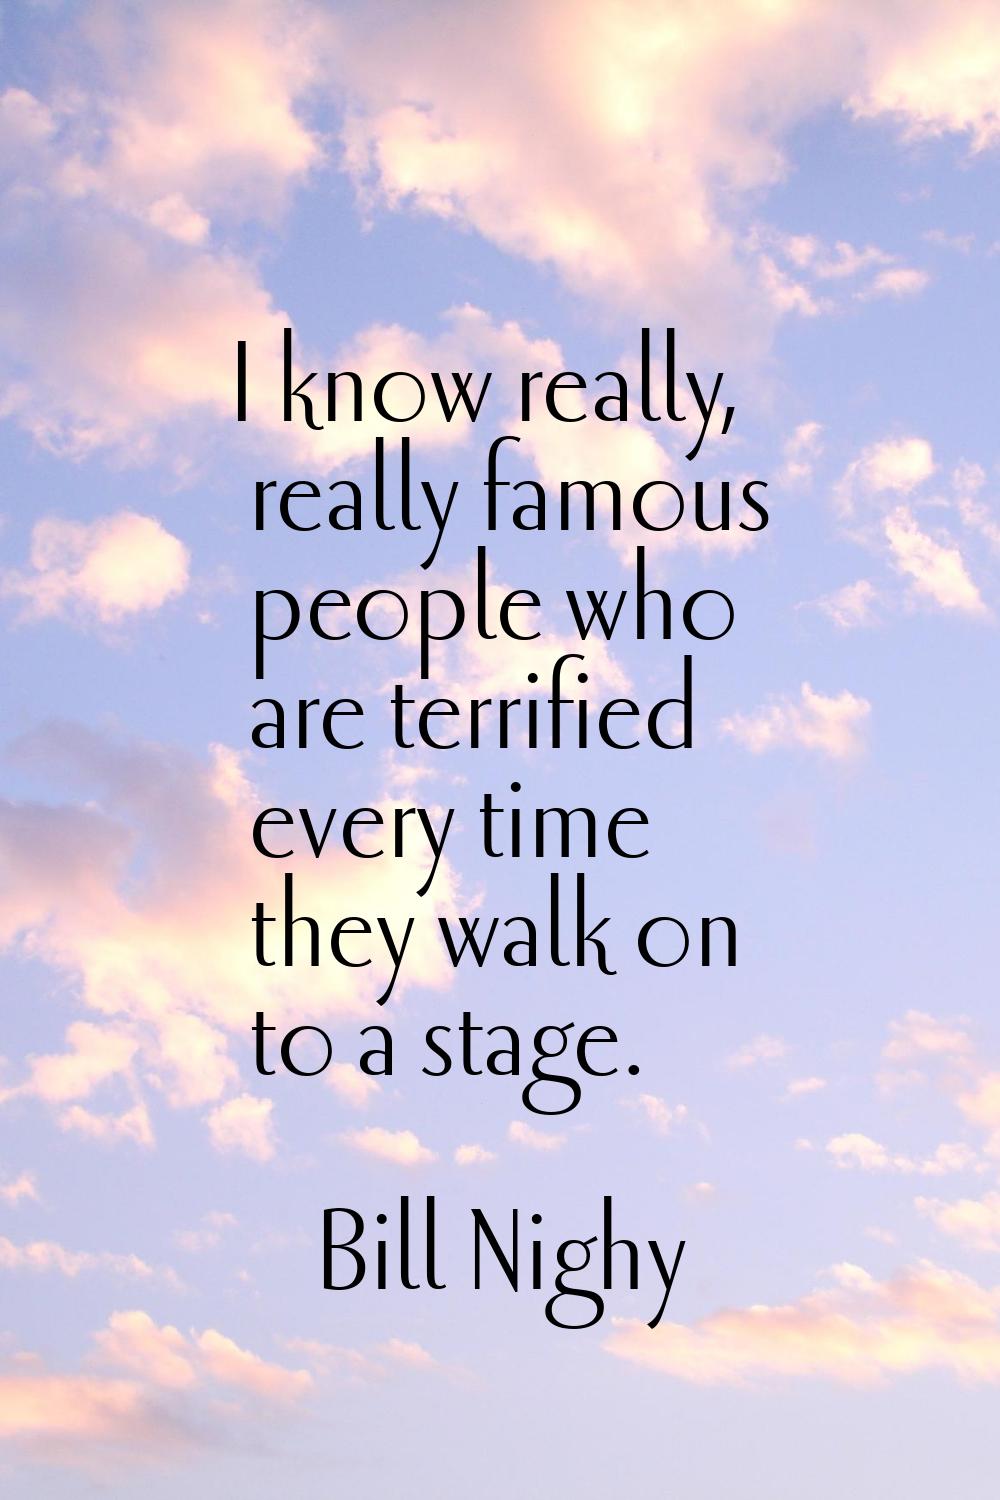 I know really, really famous people who are terrified every time they walk on to a stage.